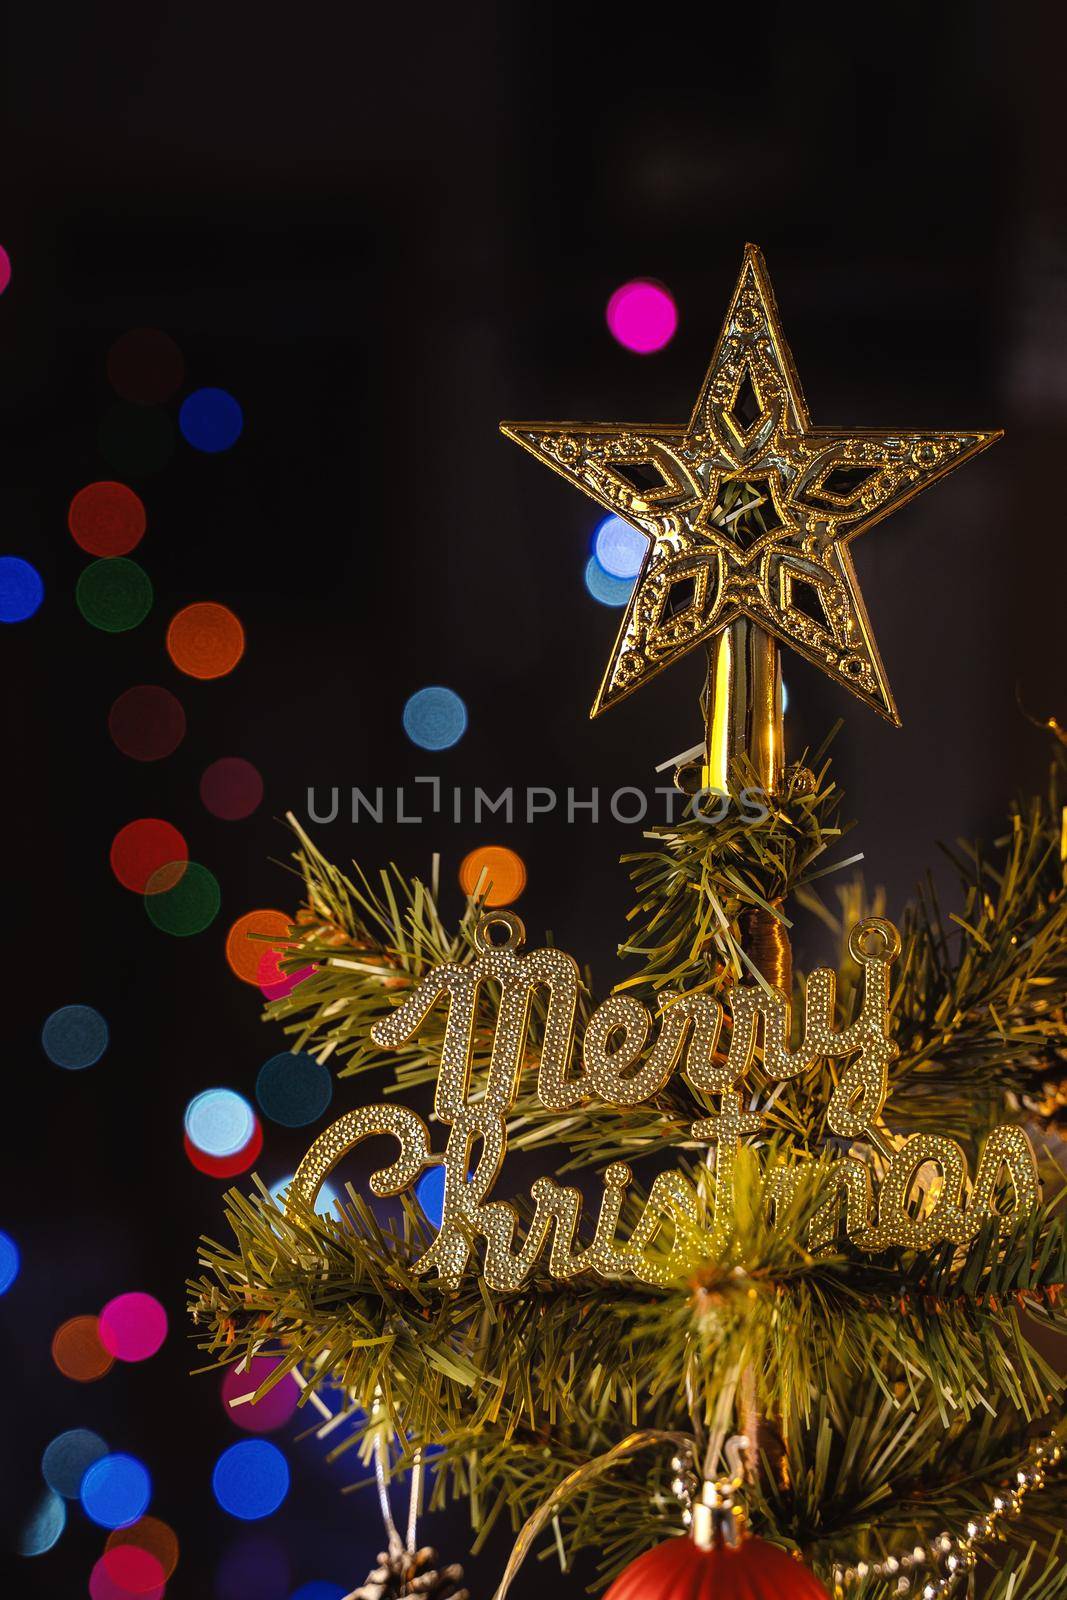 Beautiful Christmas decor concept, bauble hanging on the Christmas tree with sparkling light spot, blurry dark black background, macro detail, close up. by ROMIXIMAGE